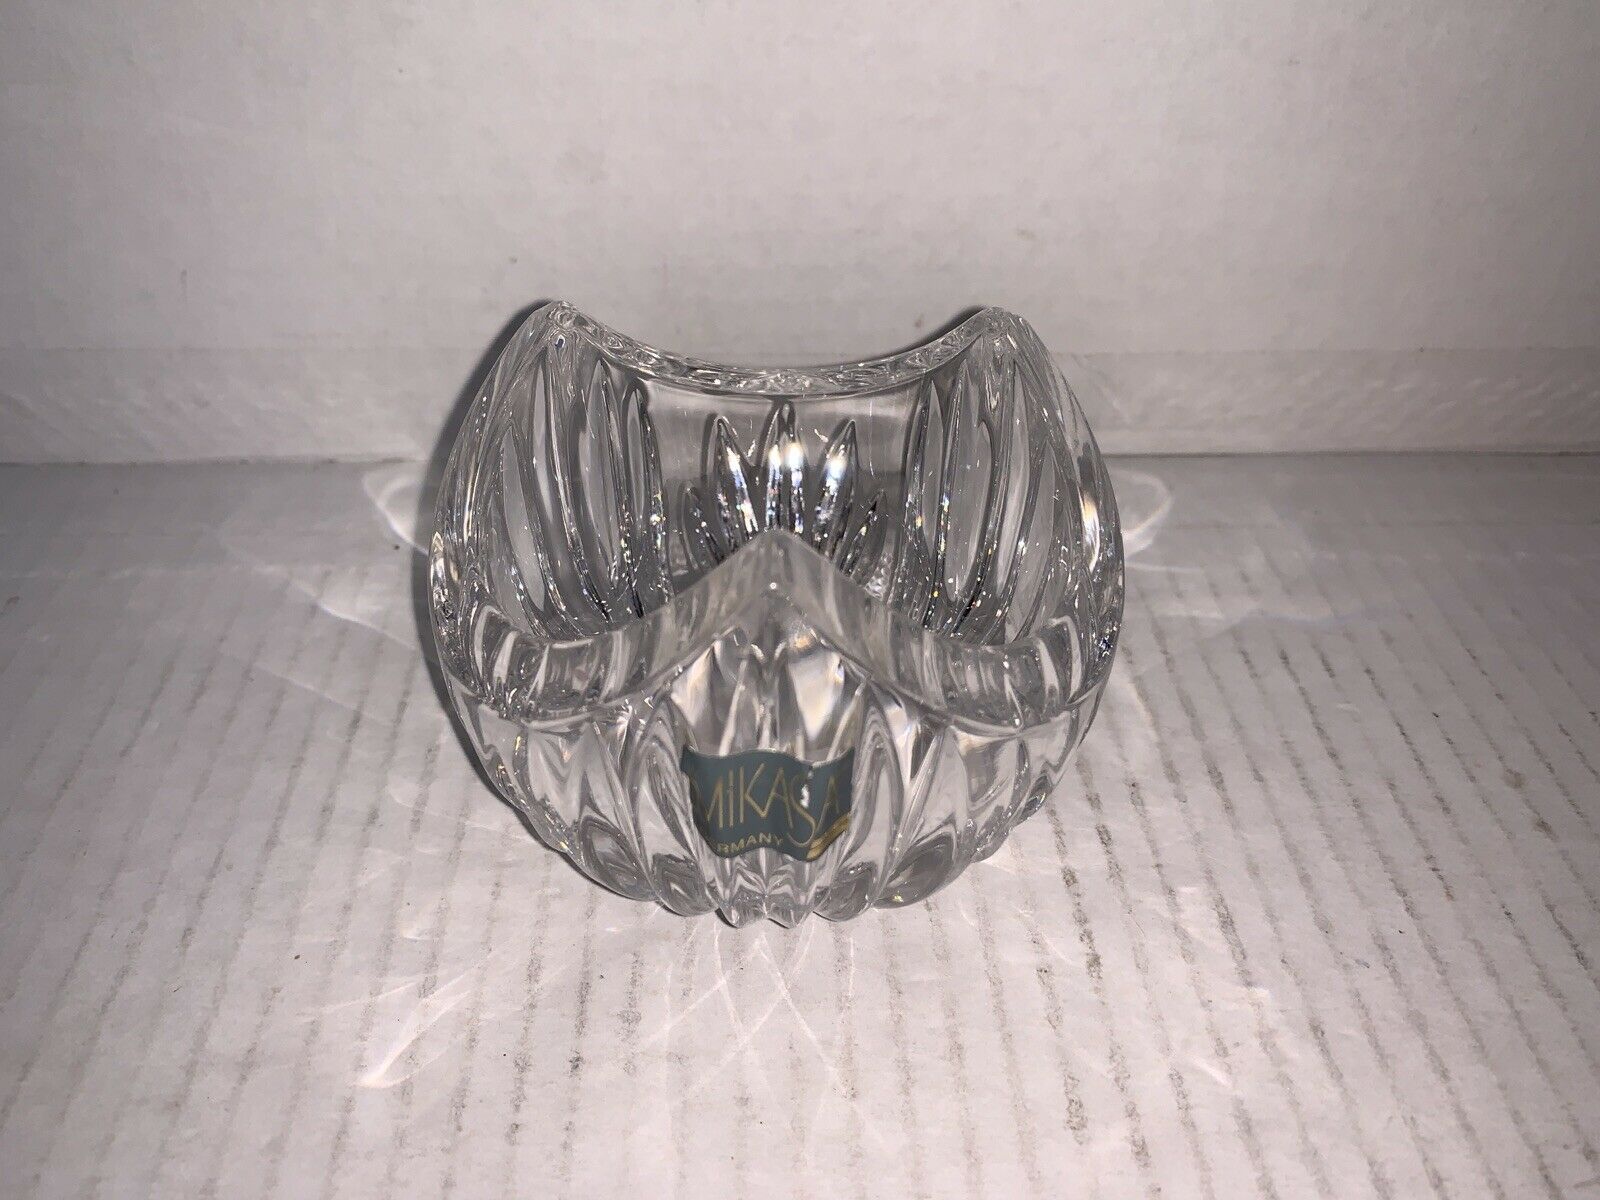 Primary image for Mikasa Crystal Candle Holder with 3-Point Cut Top 2 3/4”